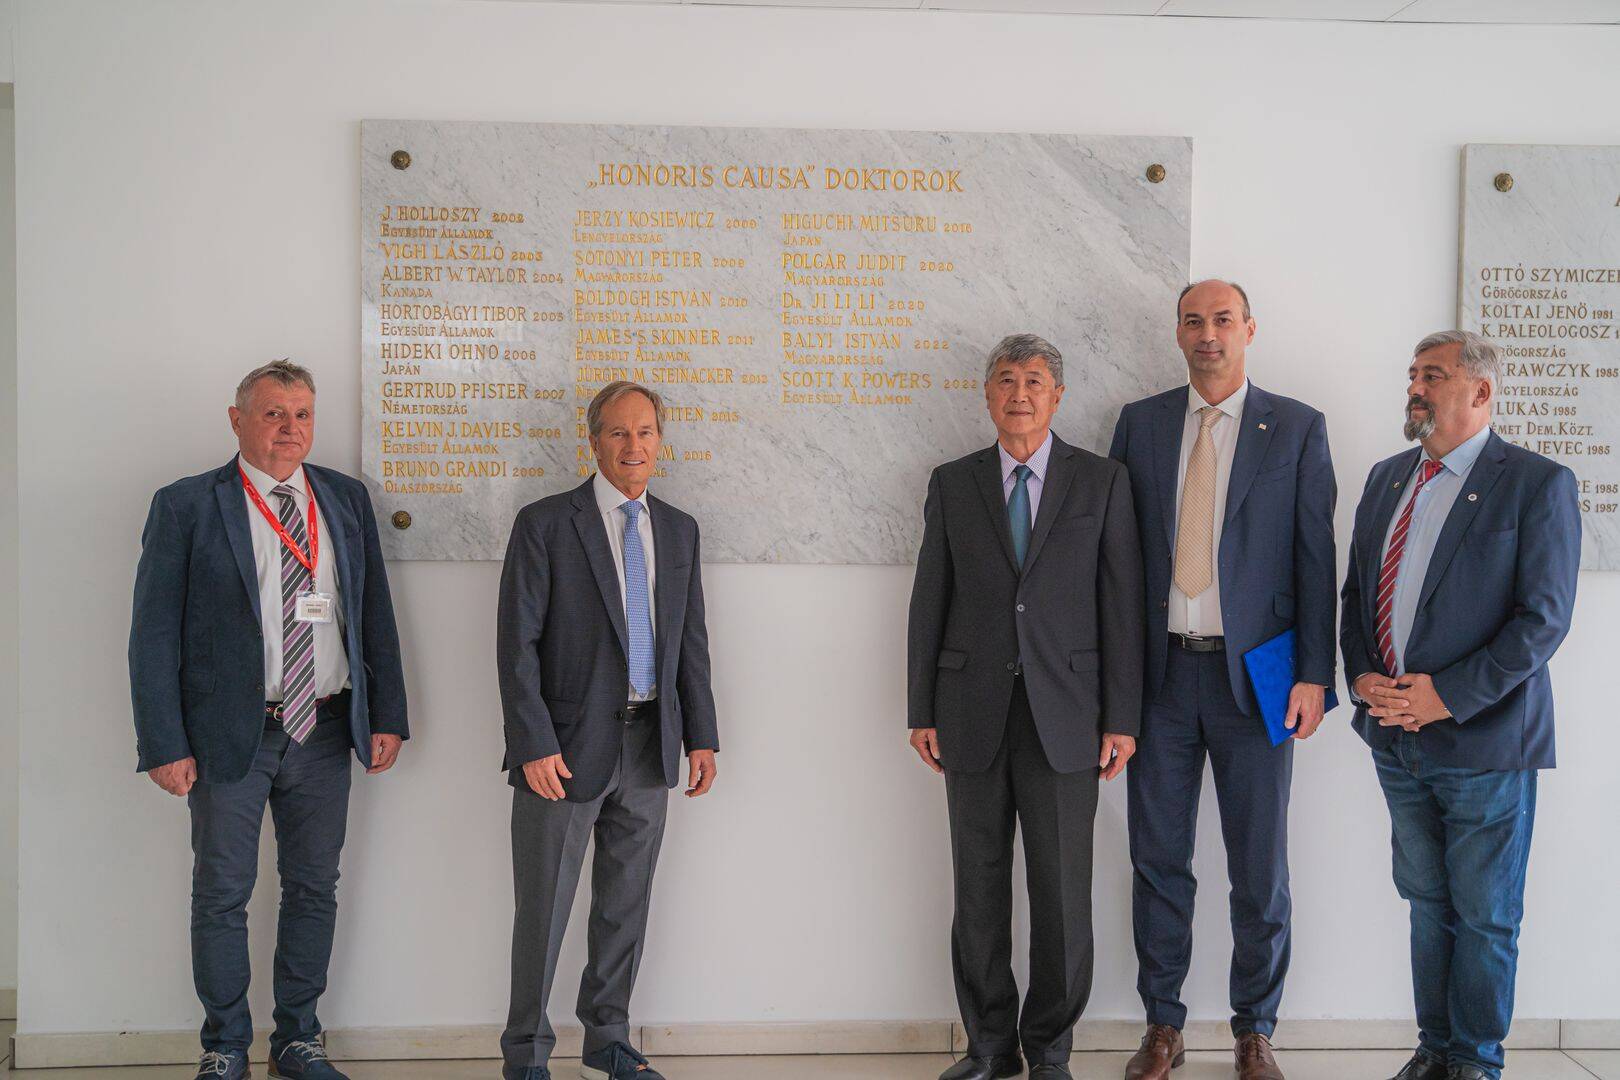 HUSS adds two more honorary doctors' name to the marble plaque